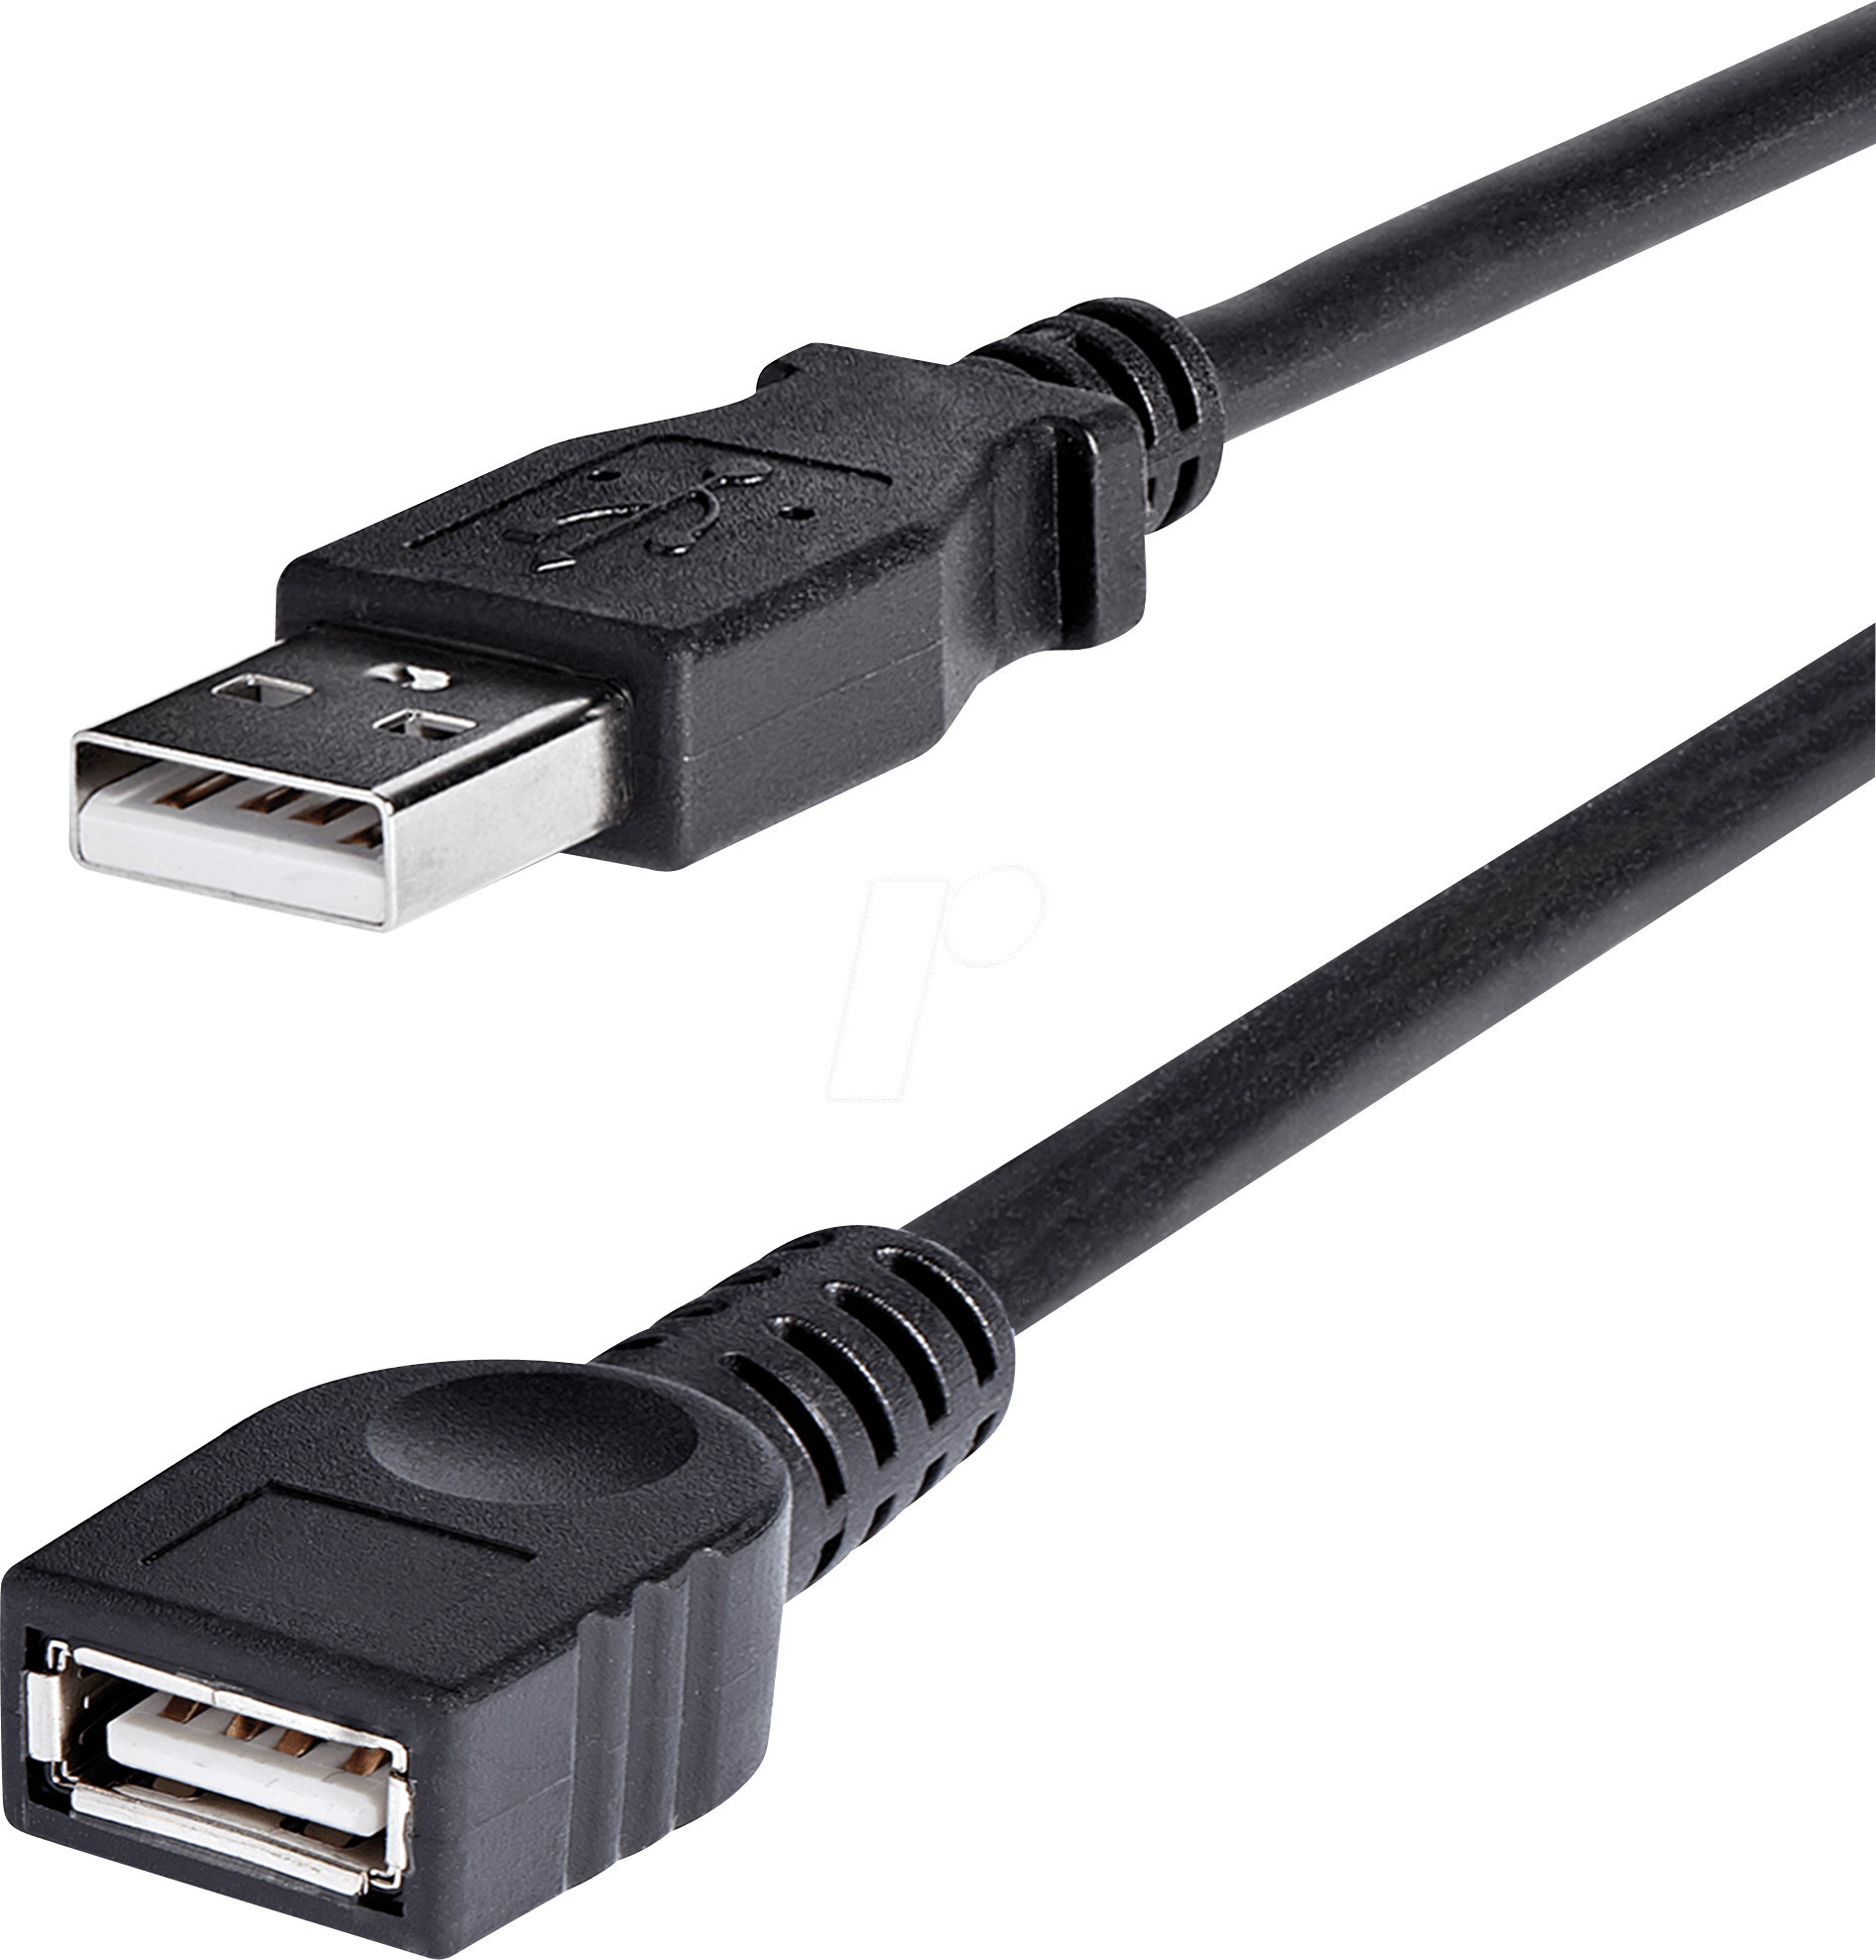 Lysee Data Cables Onsale 33cm USB 3.0 Extension Cable Type A Male To Female Cables Adapter Extender Wire Cord Black For PC Notebook 